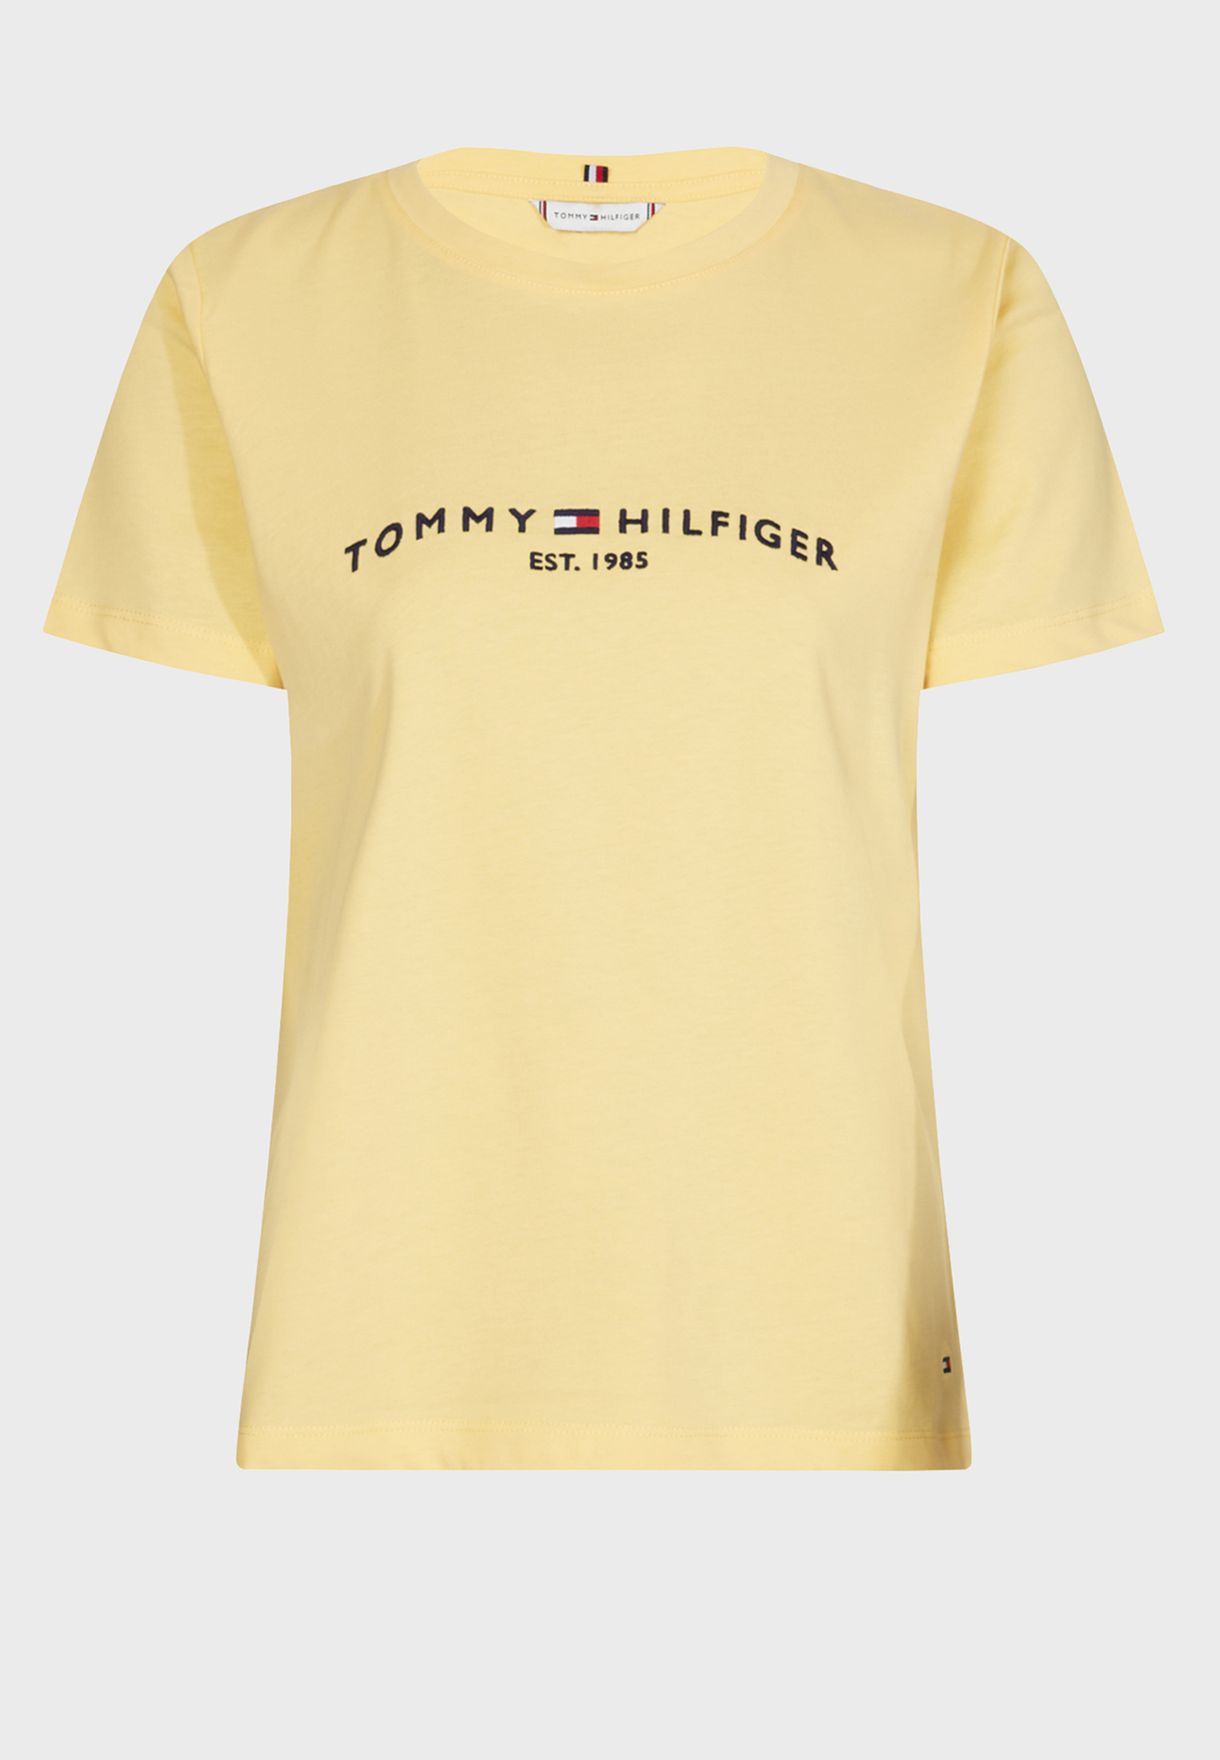 Tommy Hilfiger Yellow Shirt Outlet - 1689966775